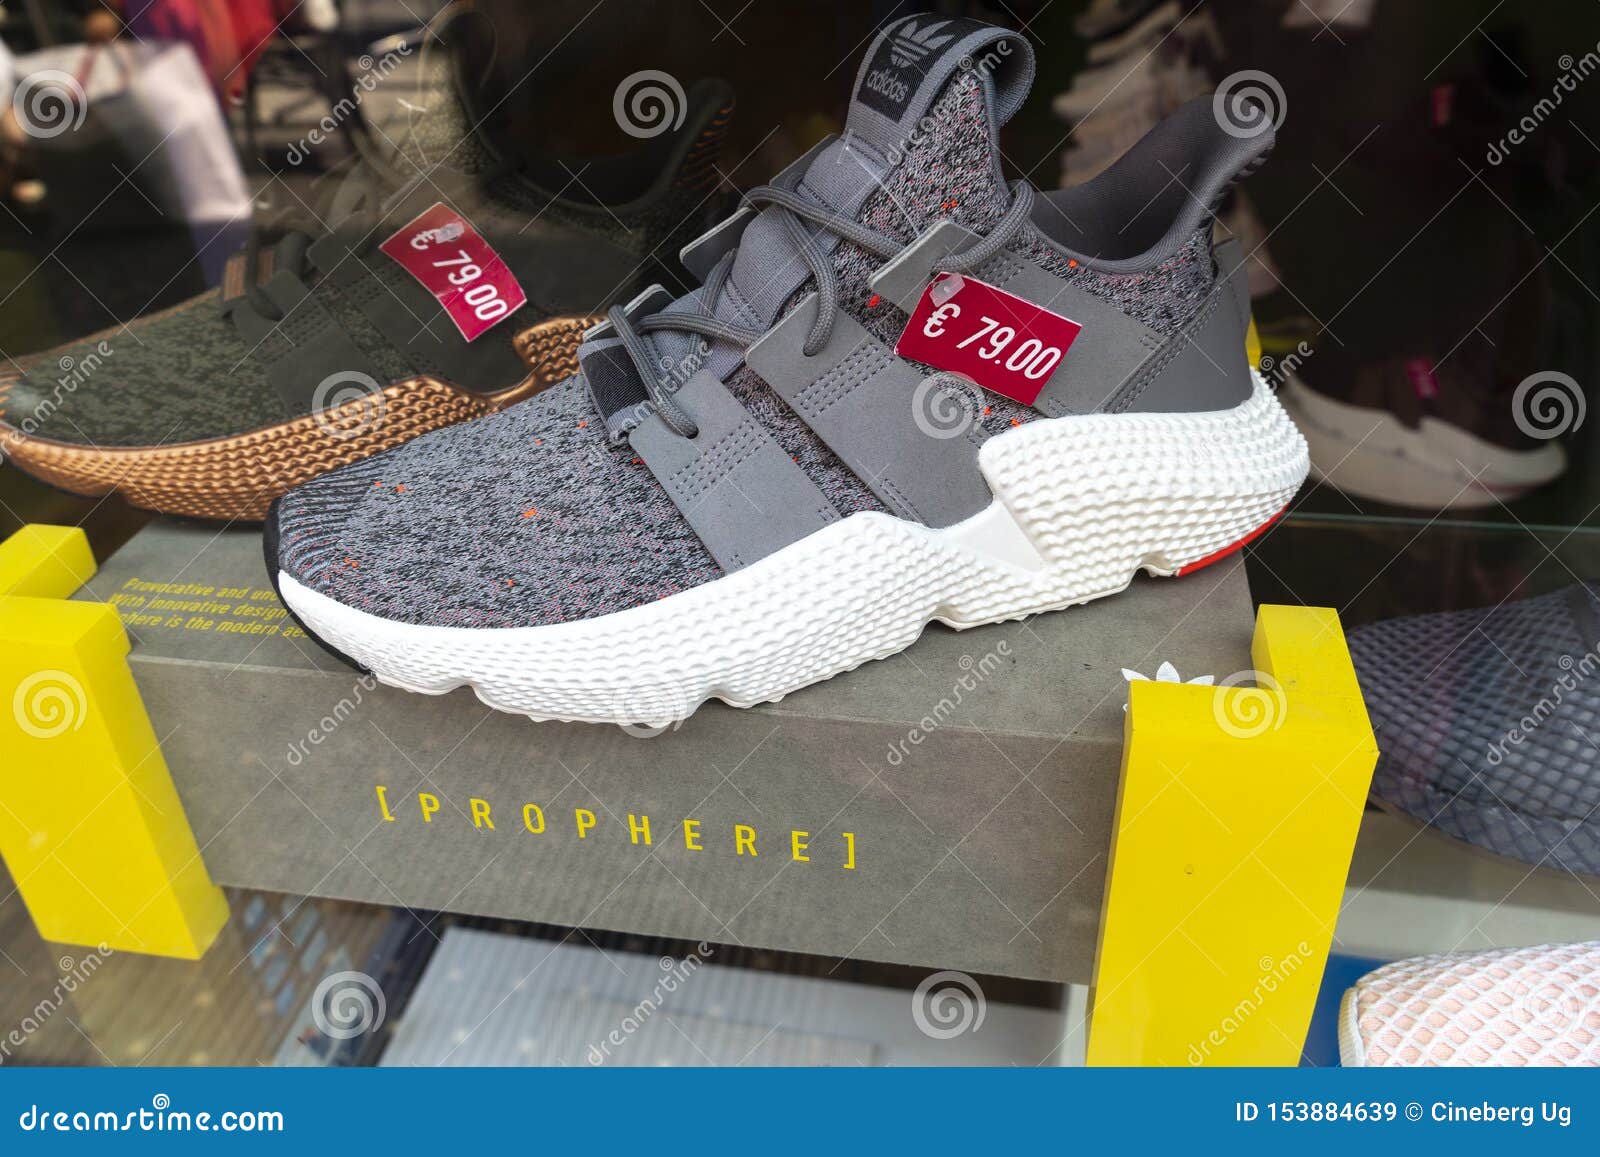 Adidas Prophere Shoes editorial stock image. Image of 153884639